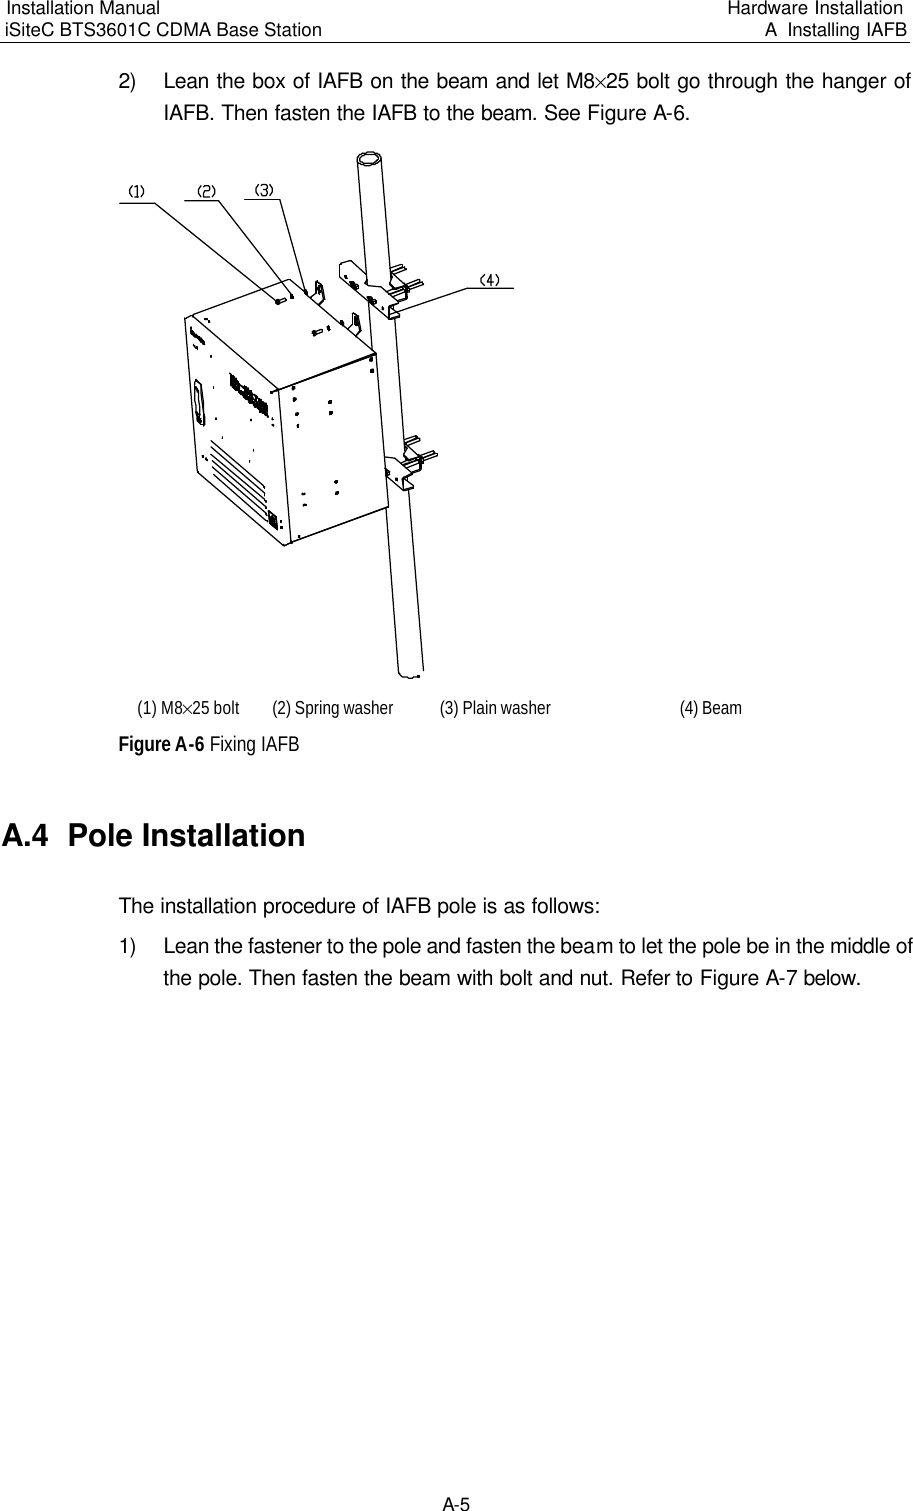 Installation Manual   iSiteC BTS3601C CDMA Base Station Hardware Installation A  Installing IAFB  A-5 2) Lean the box of IAFB on the beam and let M8%25 bolt go through the hanger of IAFB. Then fasten the IAFB to the beam. See Figure A-6.　　(1) M8%25 bolt　(2) Spring washer　(3) Plain washer　(4) Beam　Figure A-6 Fixing IAFB　A.4  Pole Installation　The installation procedure of IAFB pole is as follows:　1) Lean the fastener to the pole and fasten the beam to let the pole be in the middle of the pole. Then fasten the beam with bolt and nut. Refer to Figure A-7 below.　